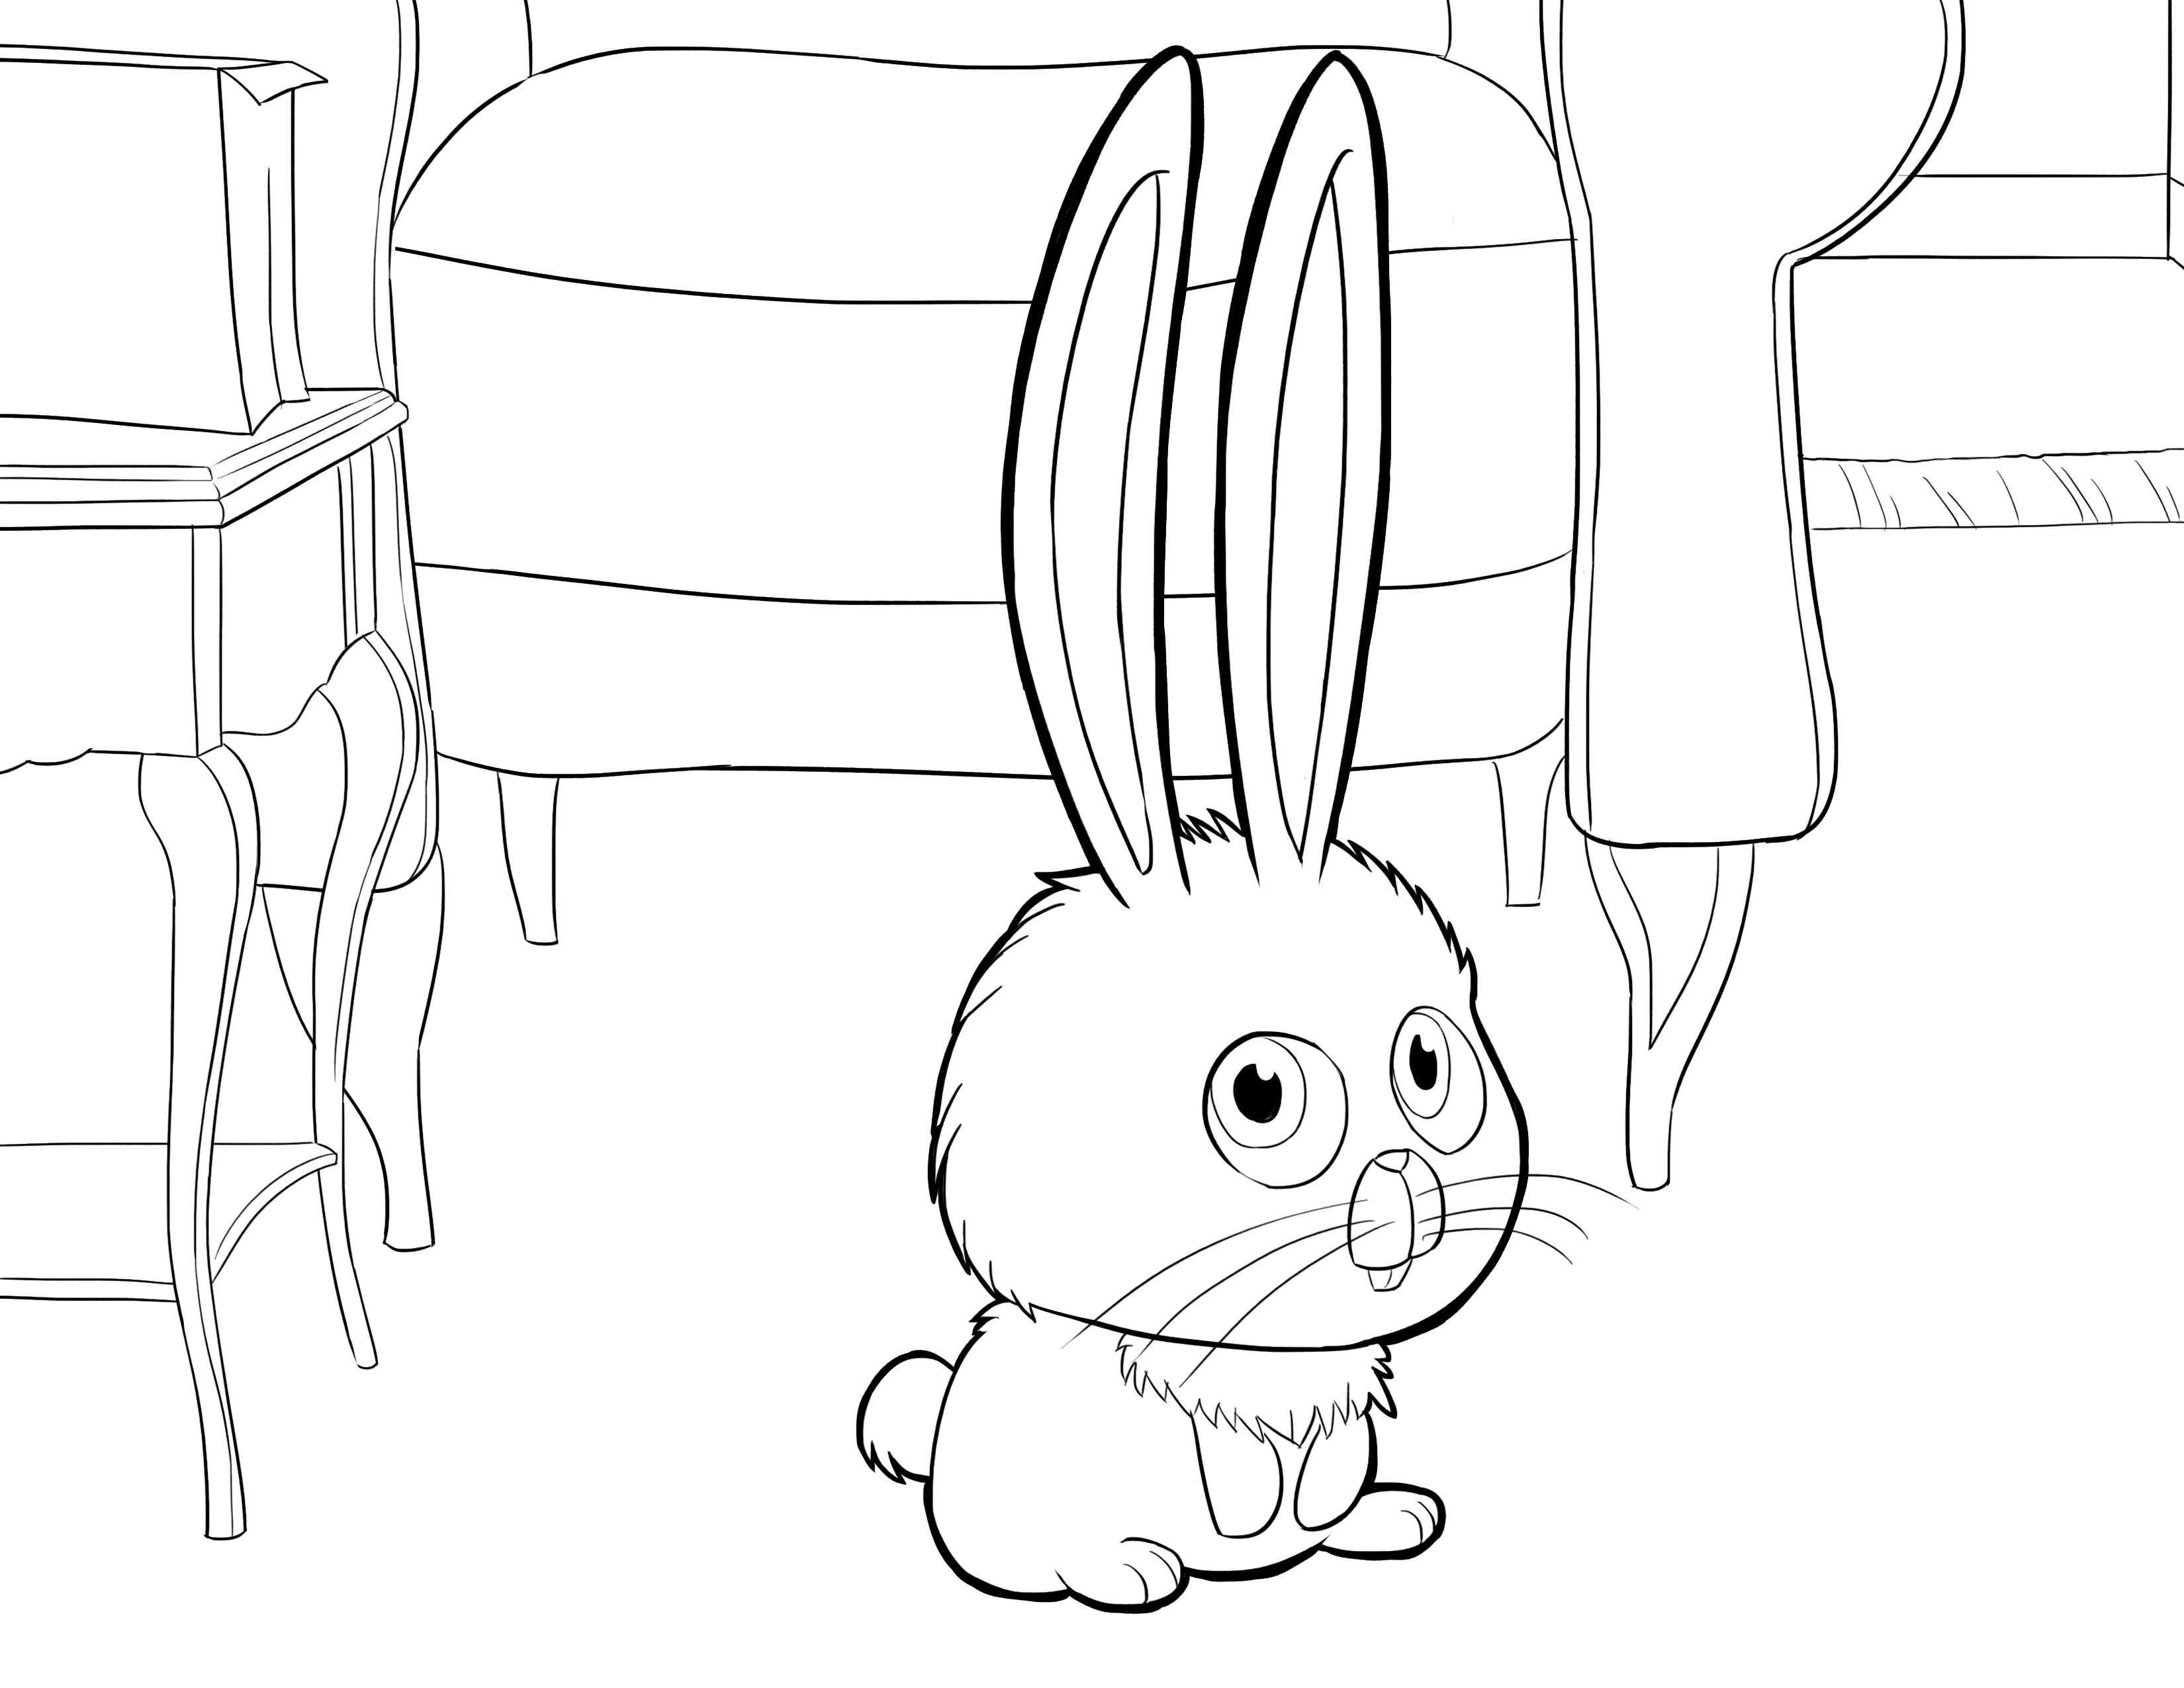 Coloring Drawing, Bunny. Category Pets allowed. Tags:  Bunny.